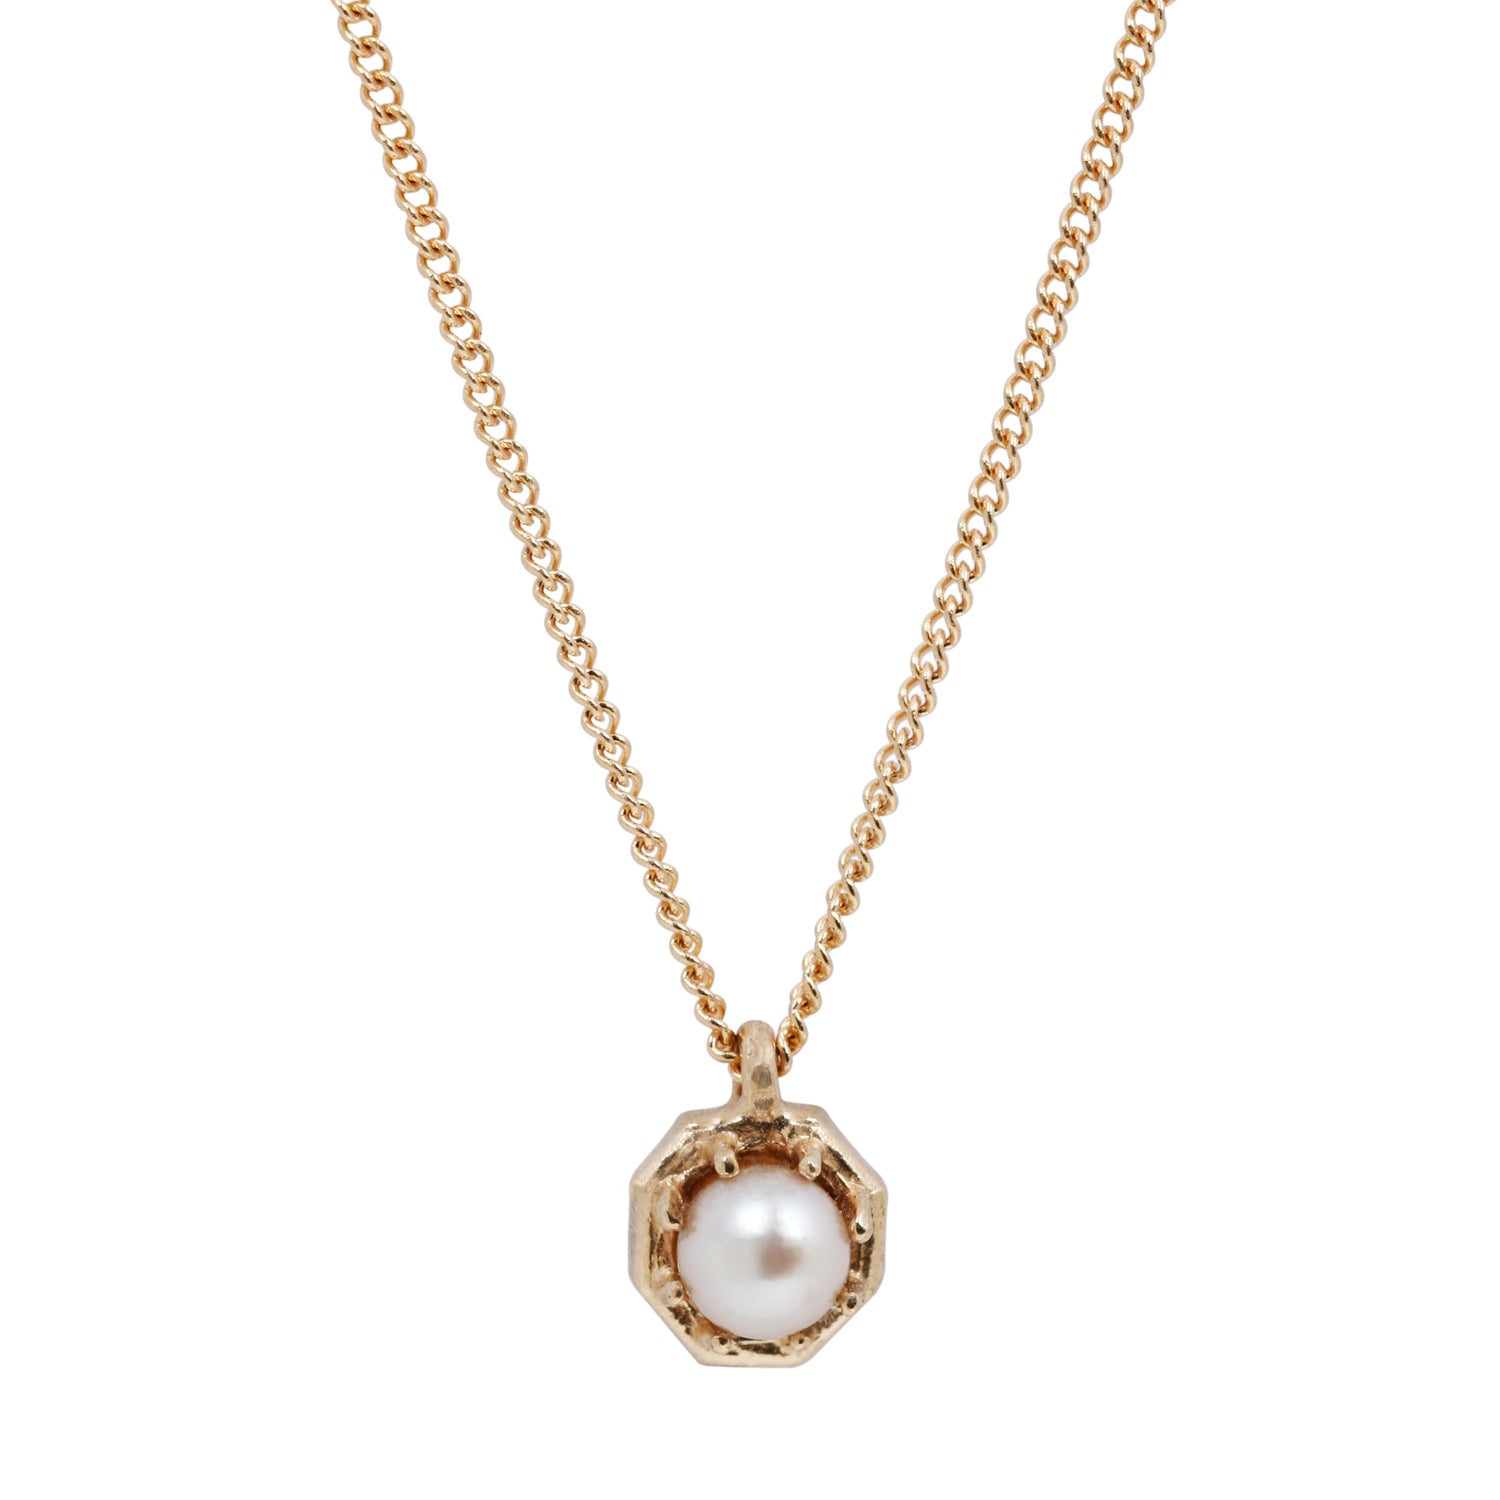 Lauren Wolf Small Akoya Pearl Necklace